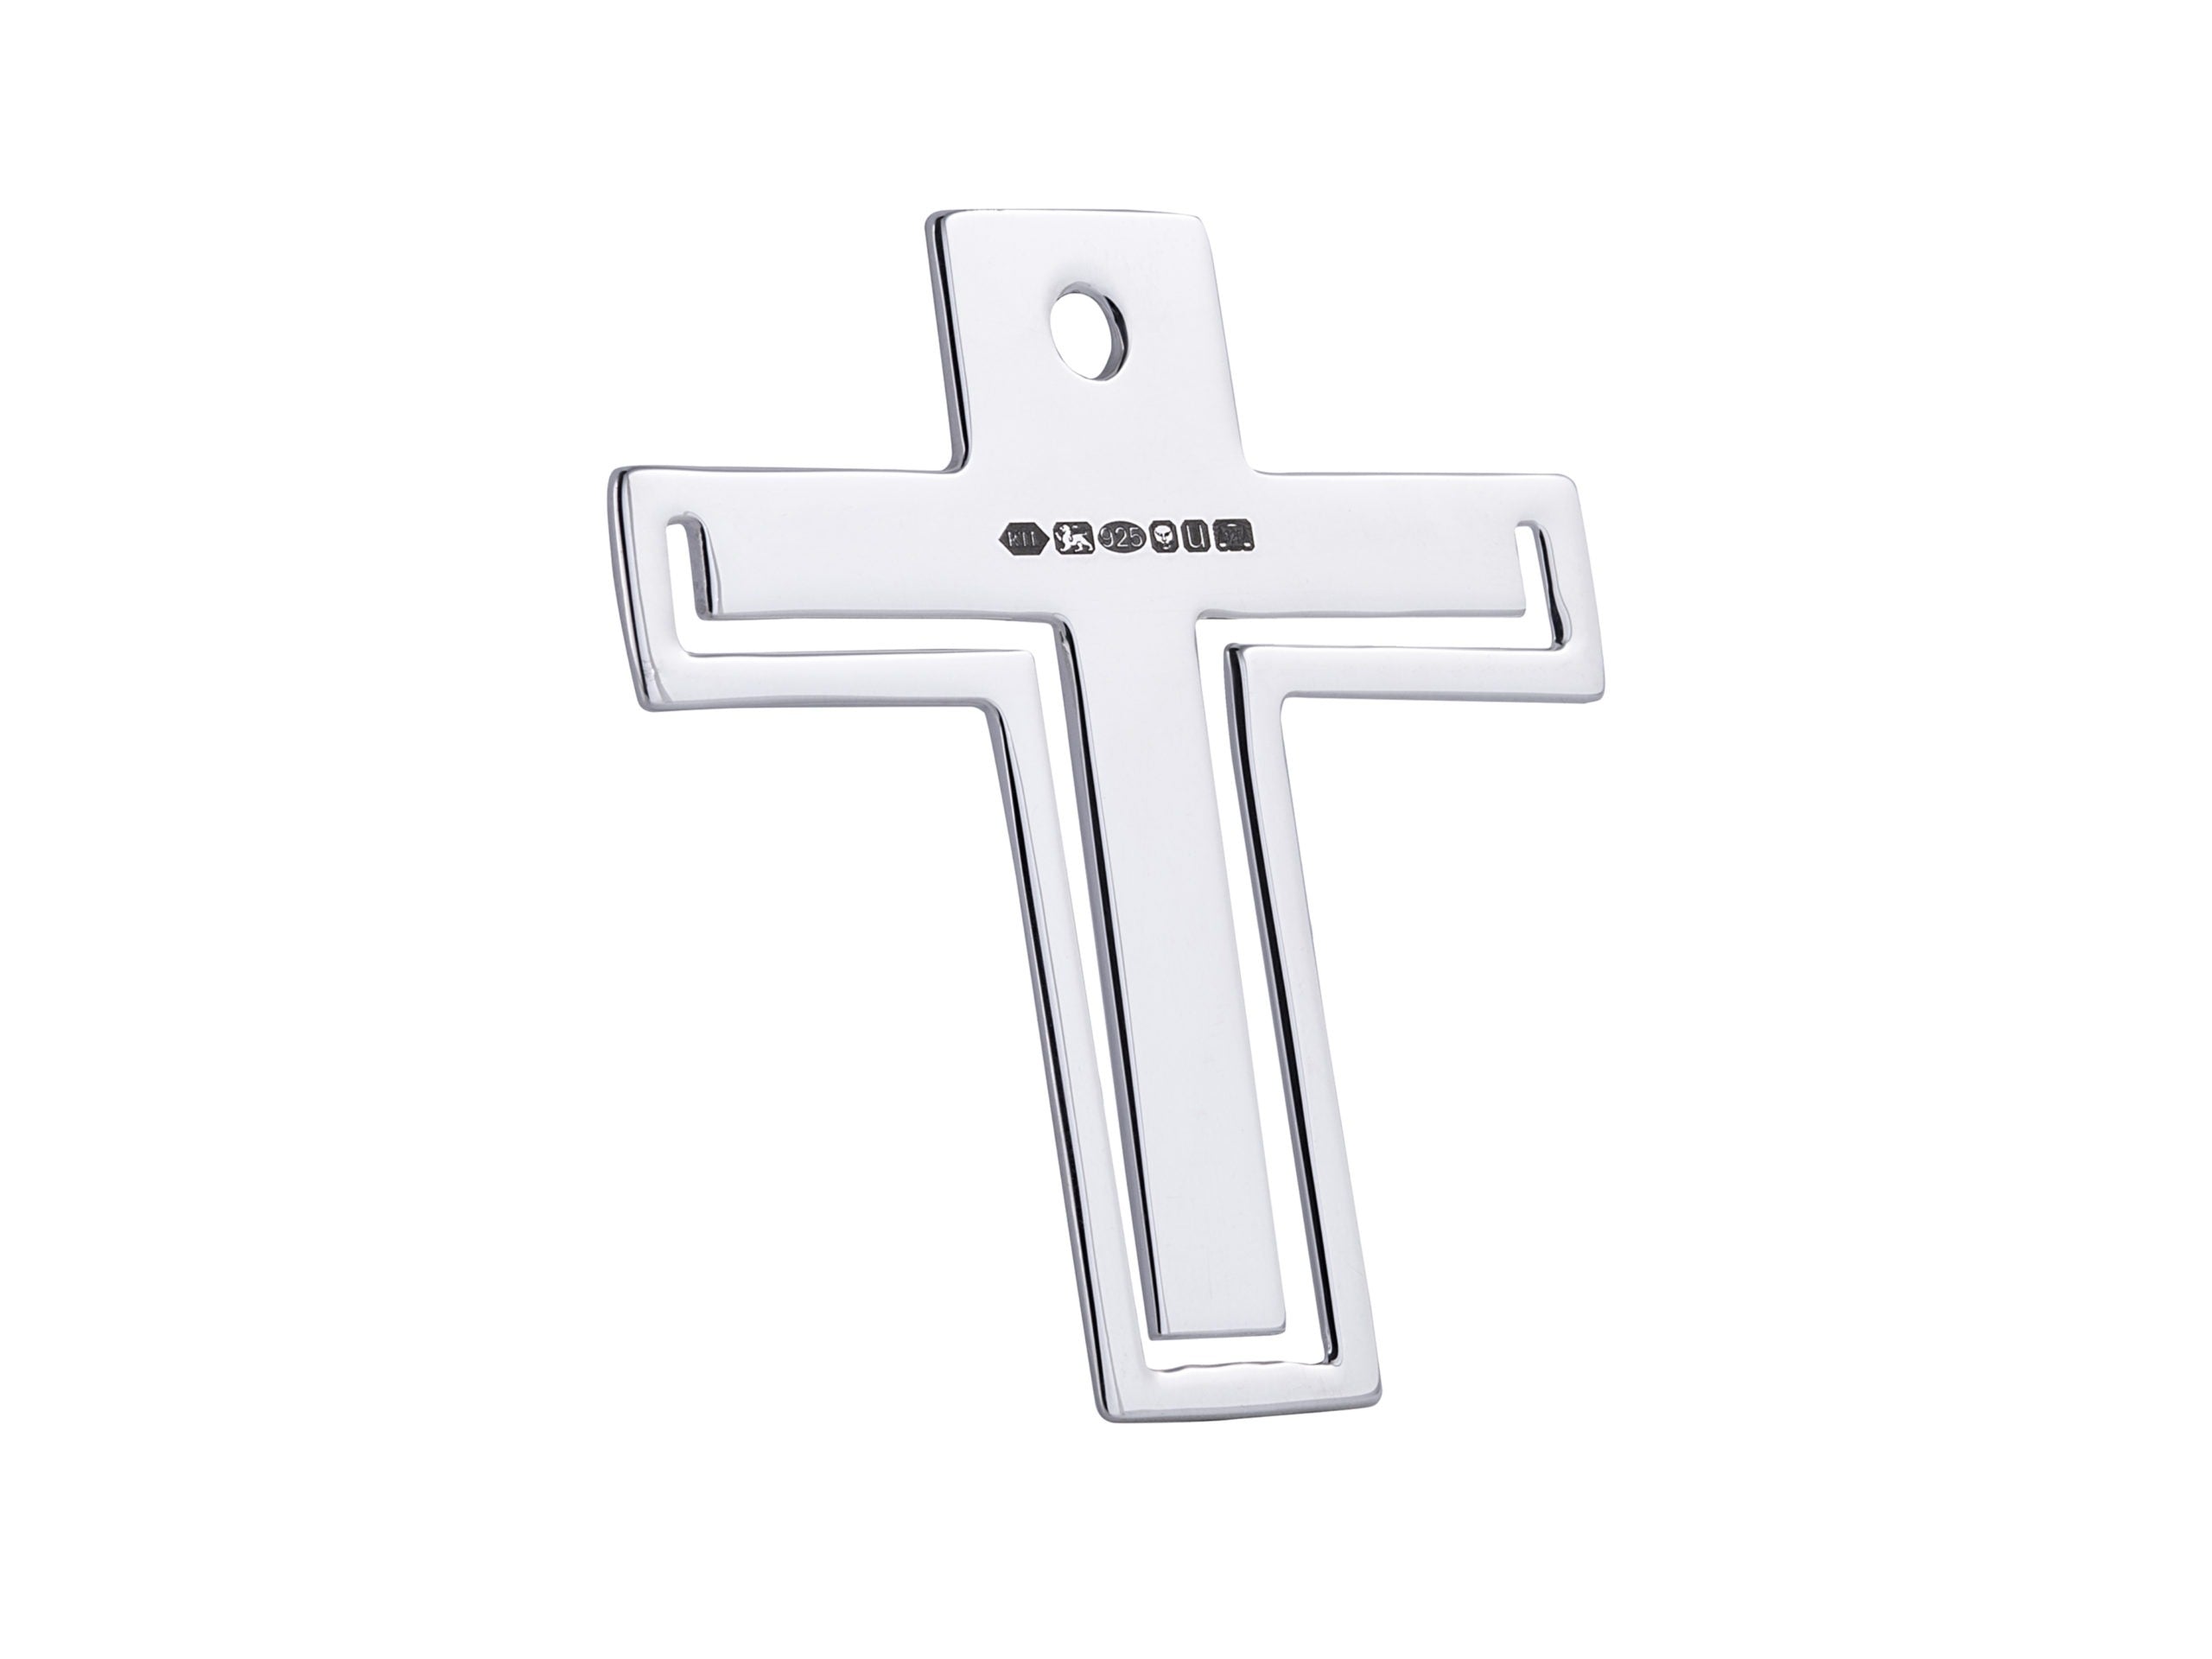 silver cross, sterling silver holy cross,  silver gifts, christening gift